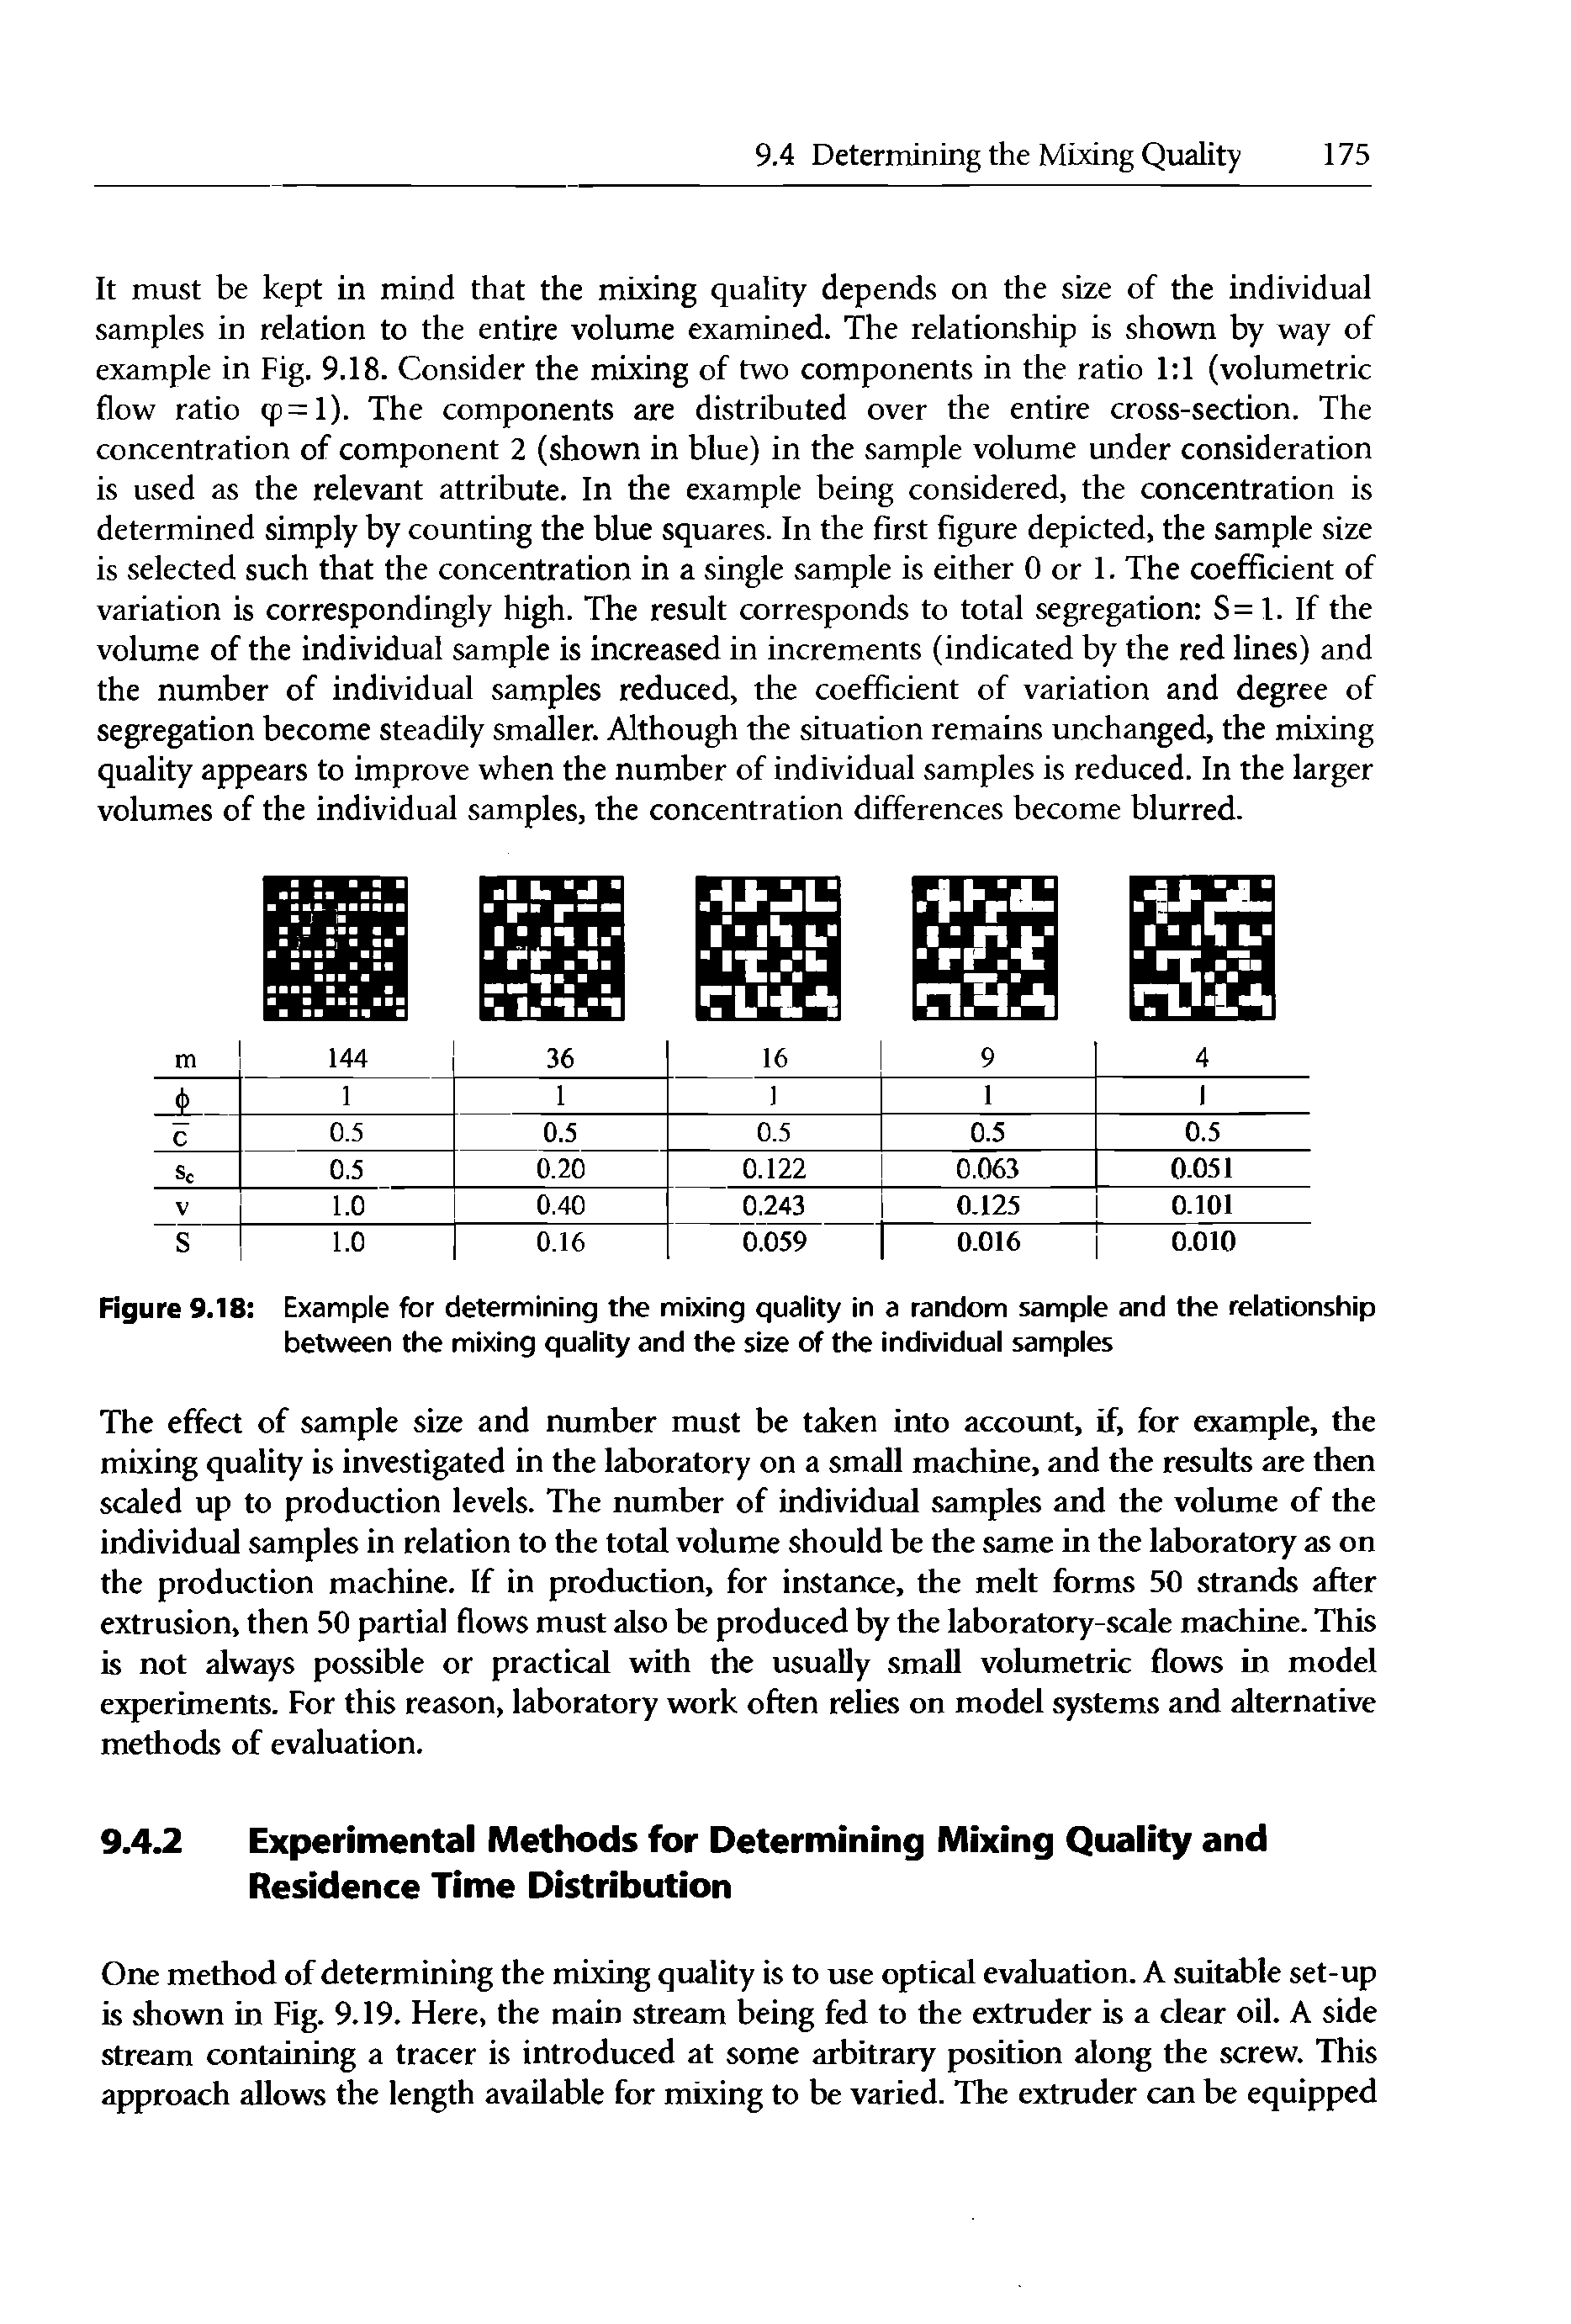 Figure 9.18 Example for determining the mixing quality in a random sample and the relationship between the mixing quality and the size of the individual samples...